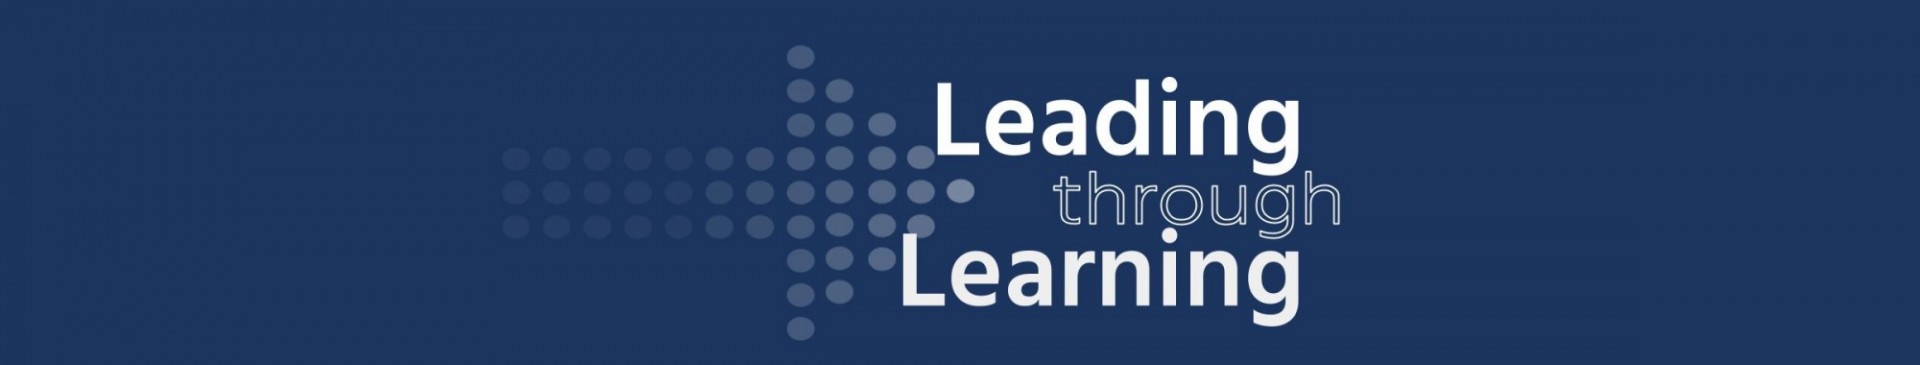 Leading through Learning blog graphic